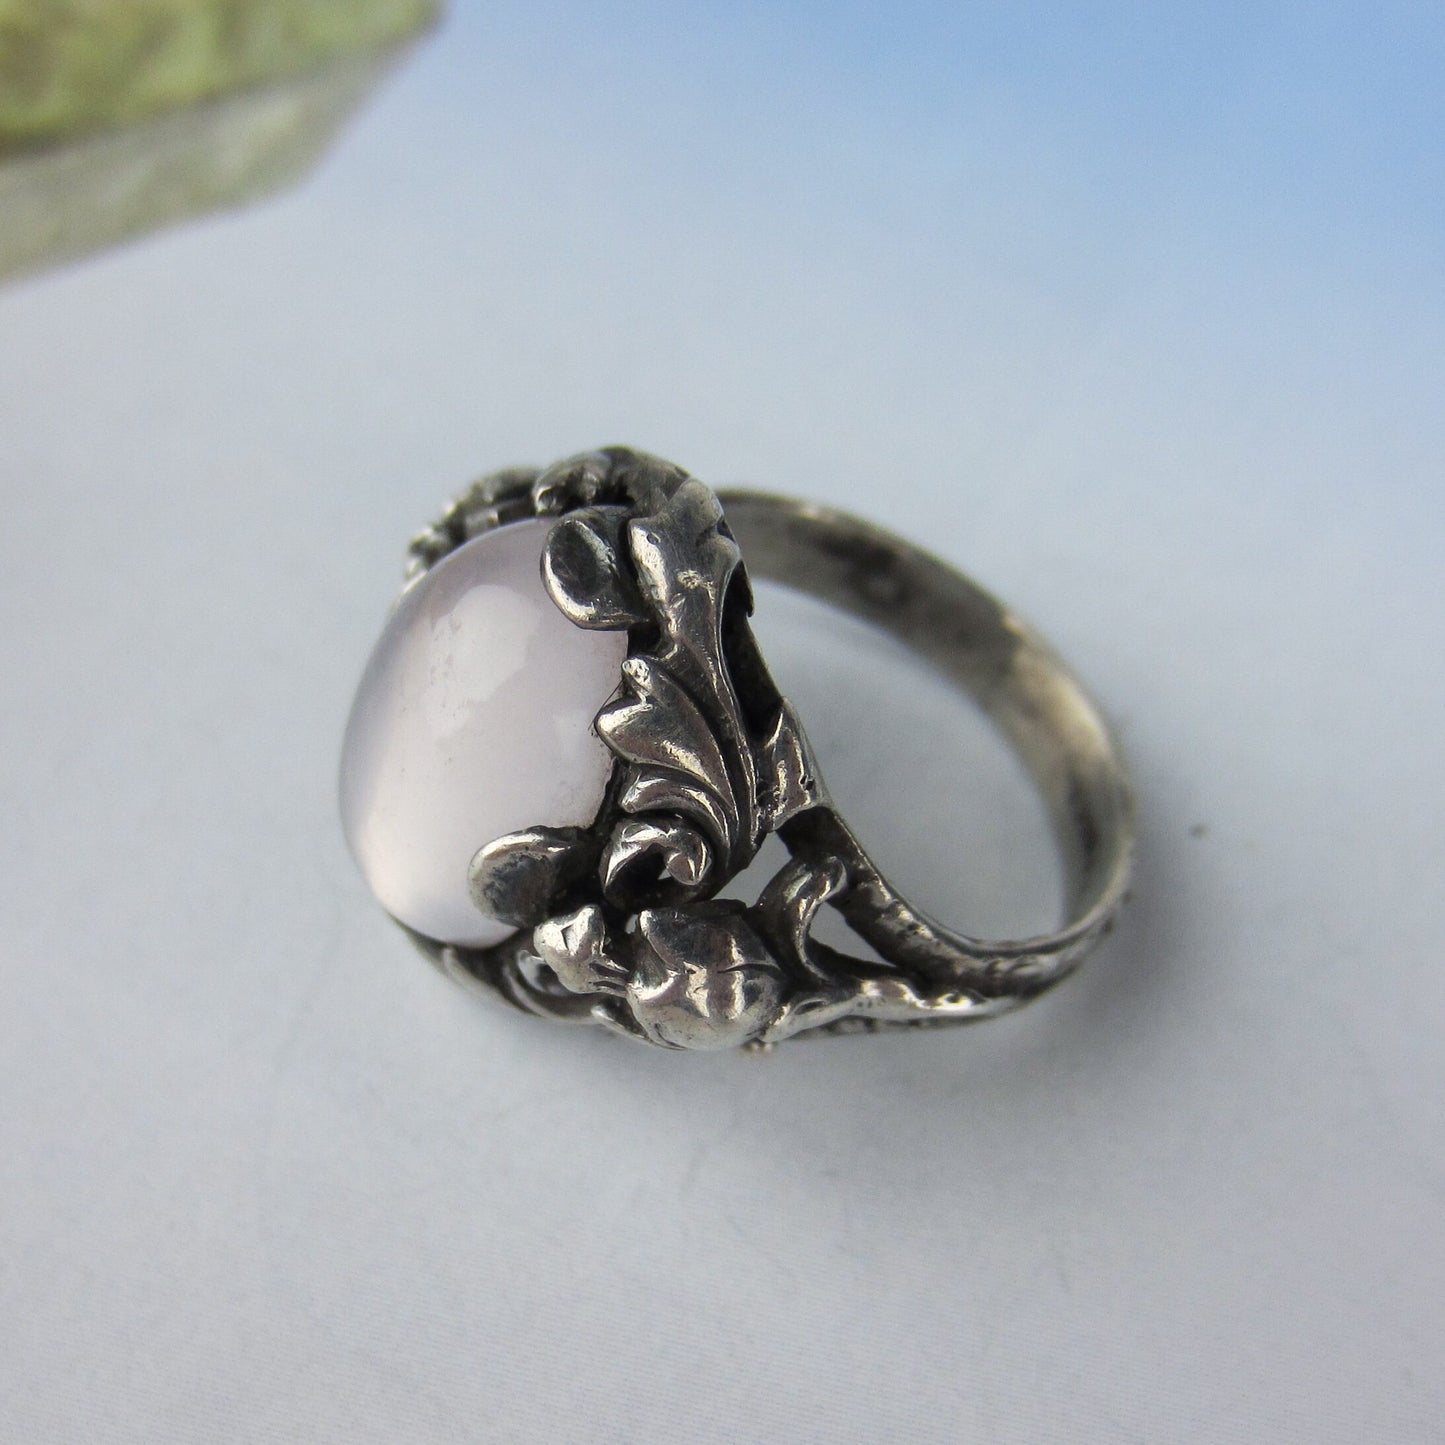 SOLD--Arts and Crafts Moonstone Ring Sterling c. 1900